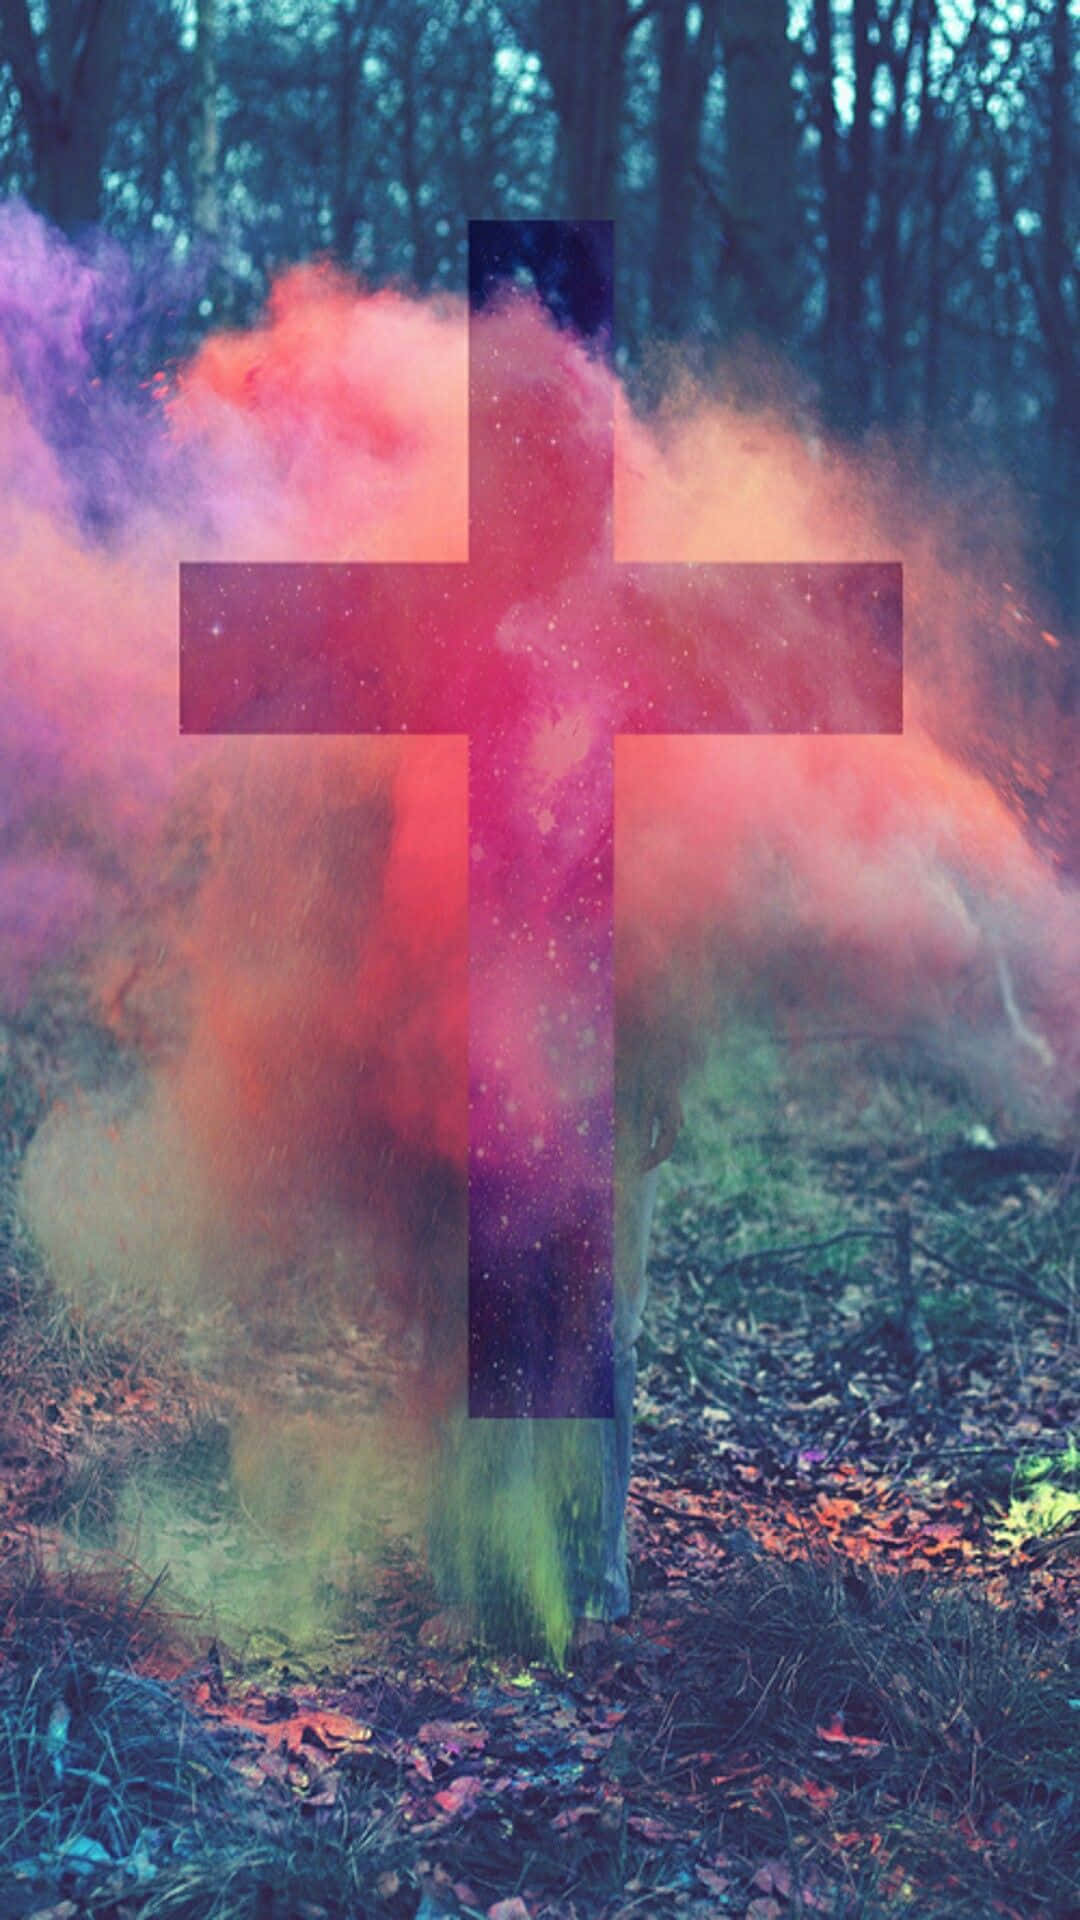 Symbolic portrayal of religion and hope // Description: This beautiful image displays a cute, entwined cross on a vibrant blue and pink background, symbolic of faith and hope. // Related Keywords: Cross, Religion, Faith, Spirituality, Hope, Symbolism, Blue, Pink, Vibrant, Background, Religion and Hope. Wallpaper